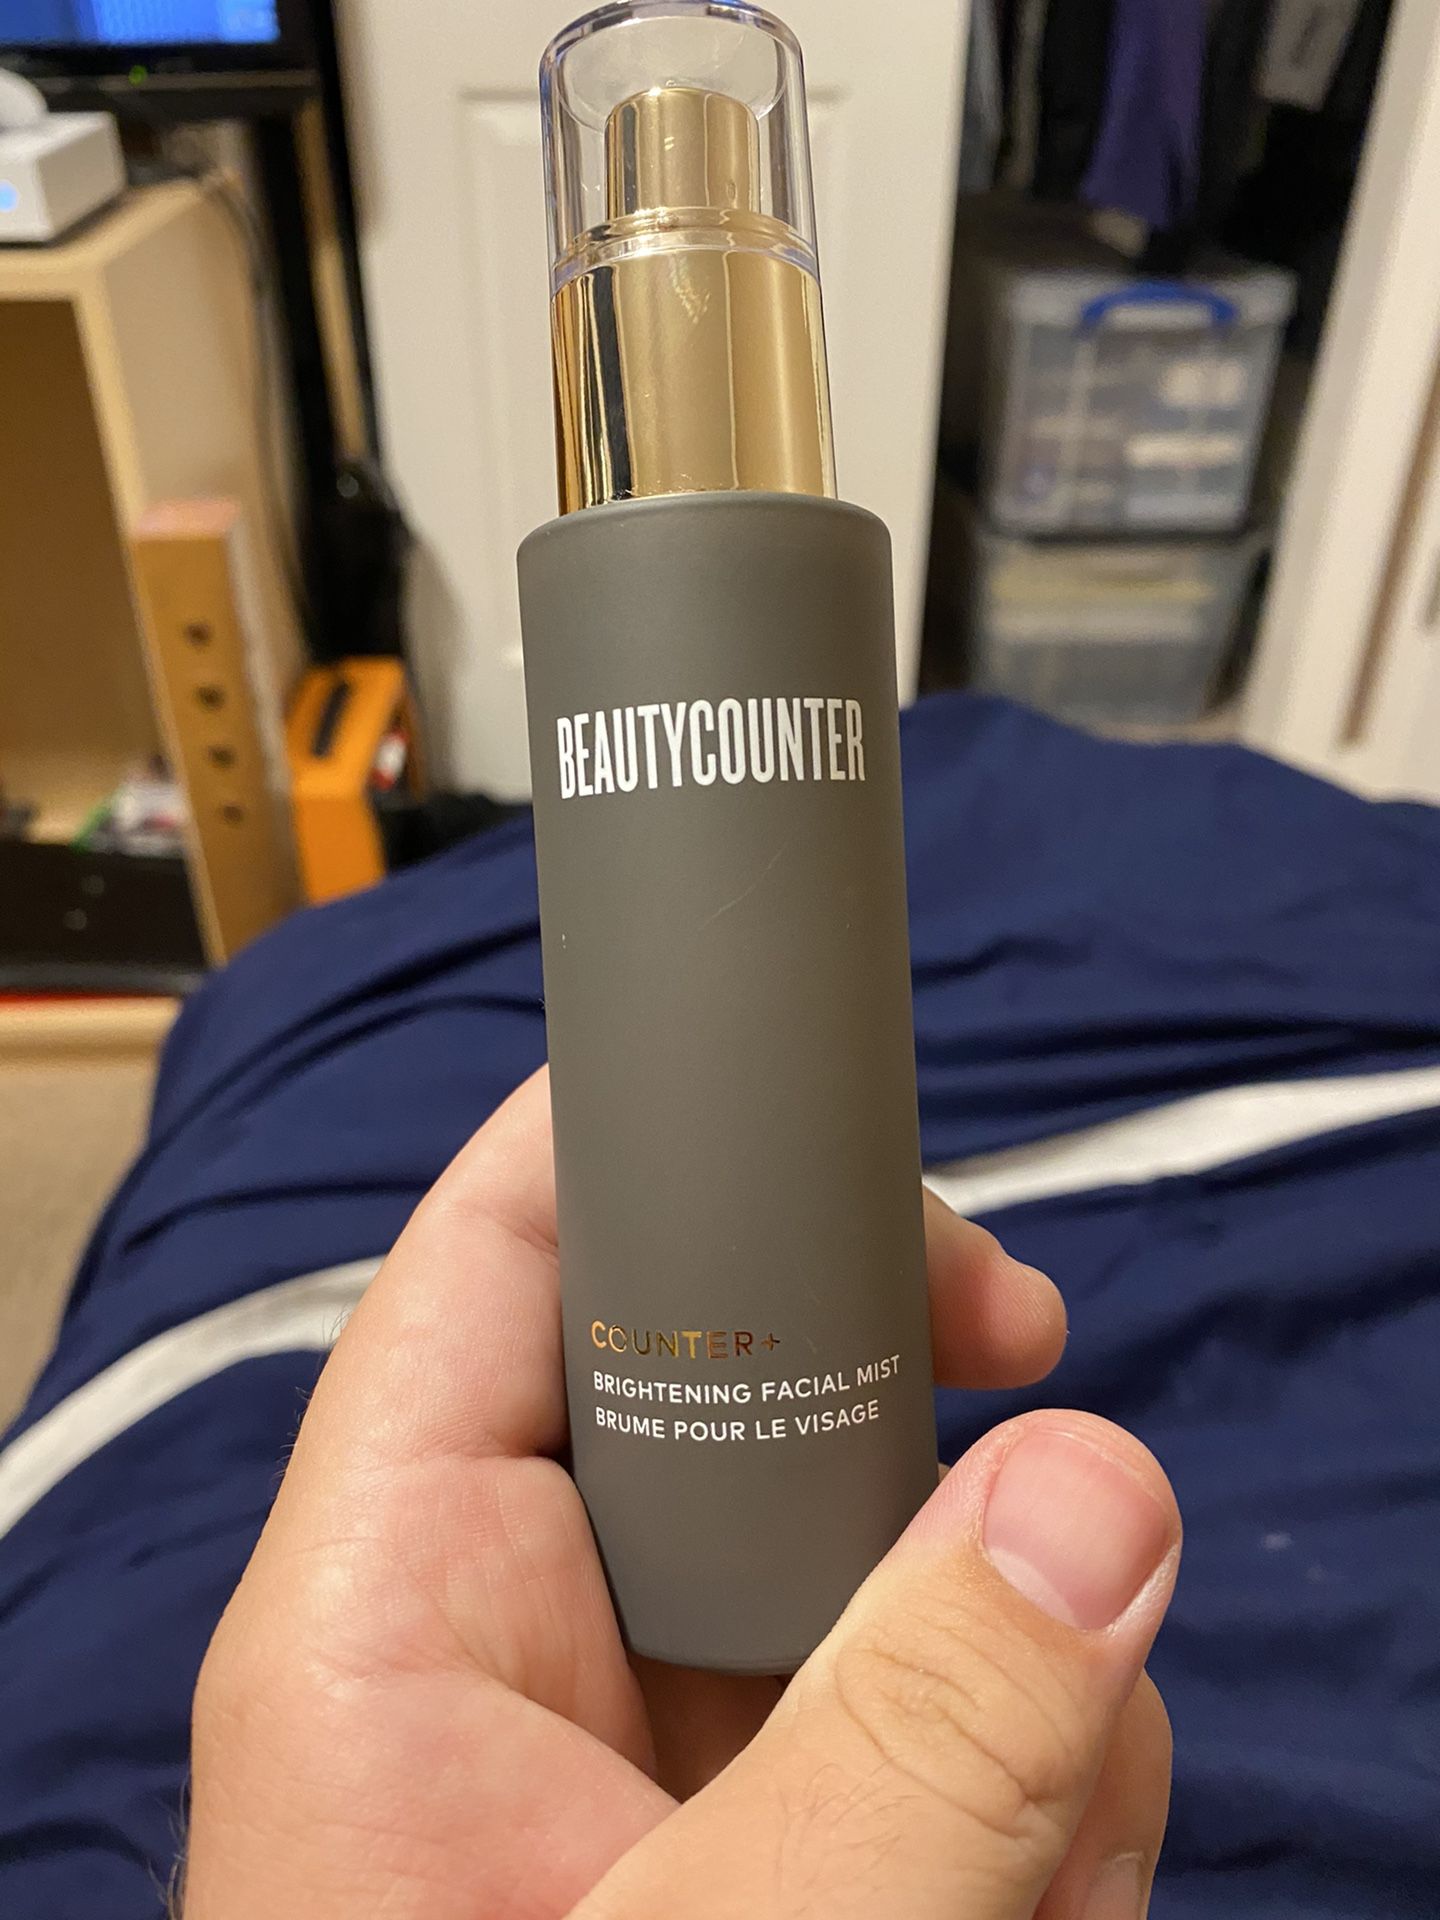 Beauty counter new facial mist- never used- RETAILS AT $30